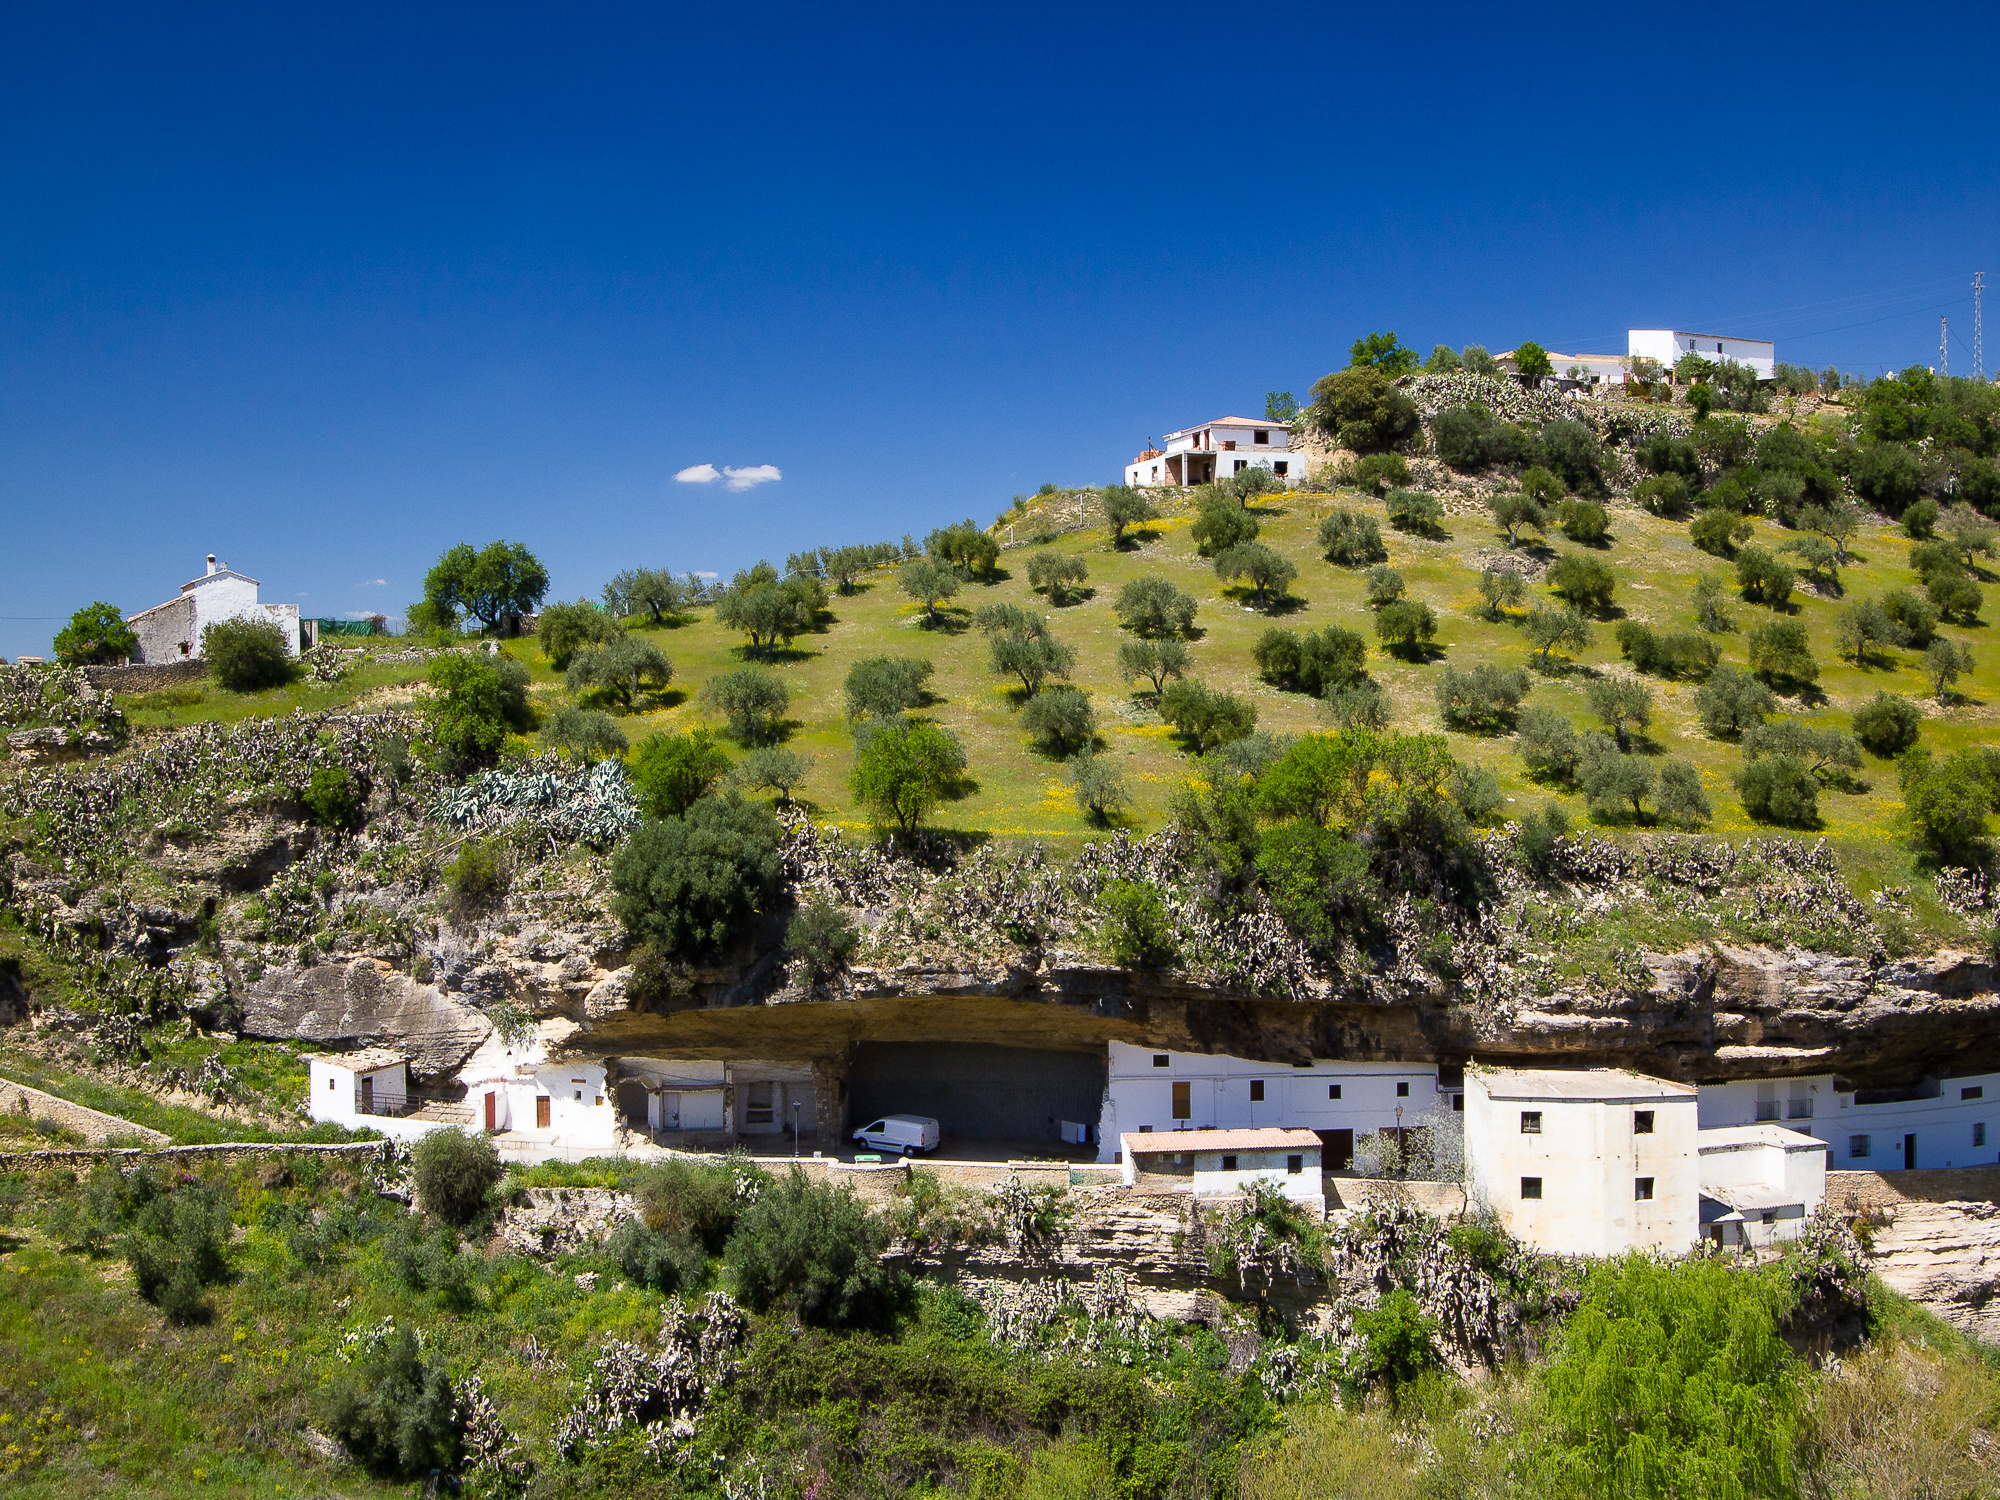 Houses, tucked into the rock and landscape at Setenil de las Bodegas